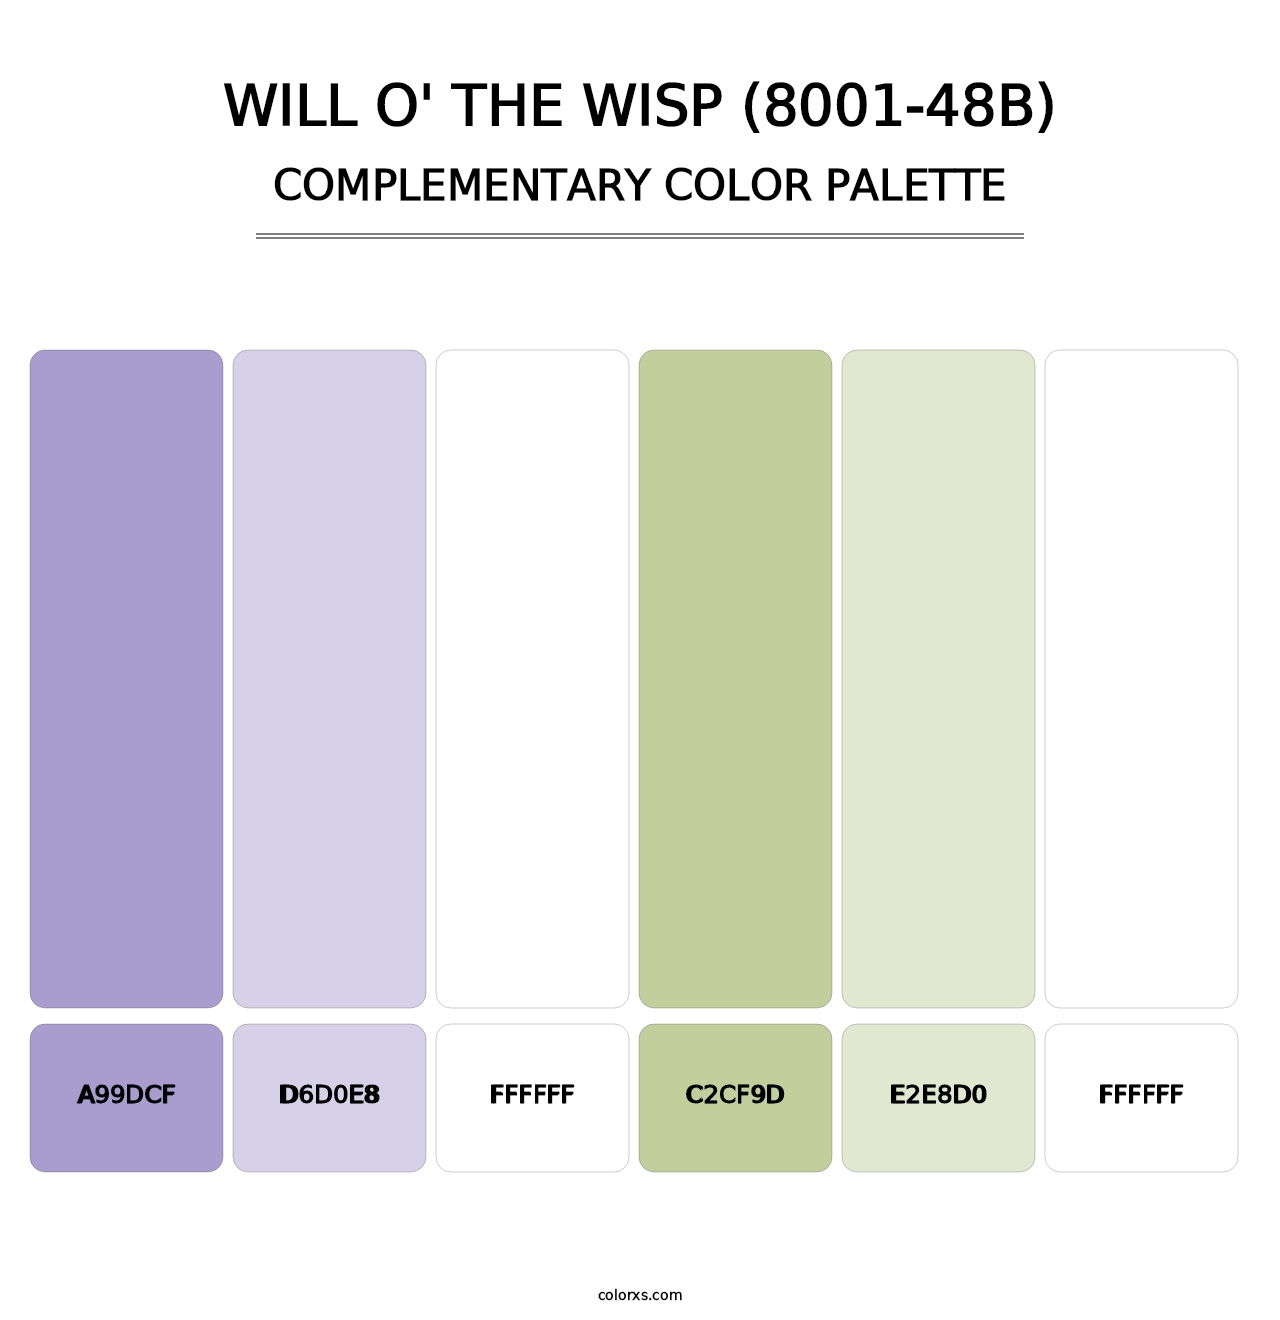 Will o' the Wisp (8001-48B) - Complementary Color Palette